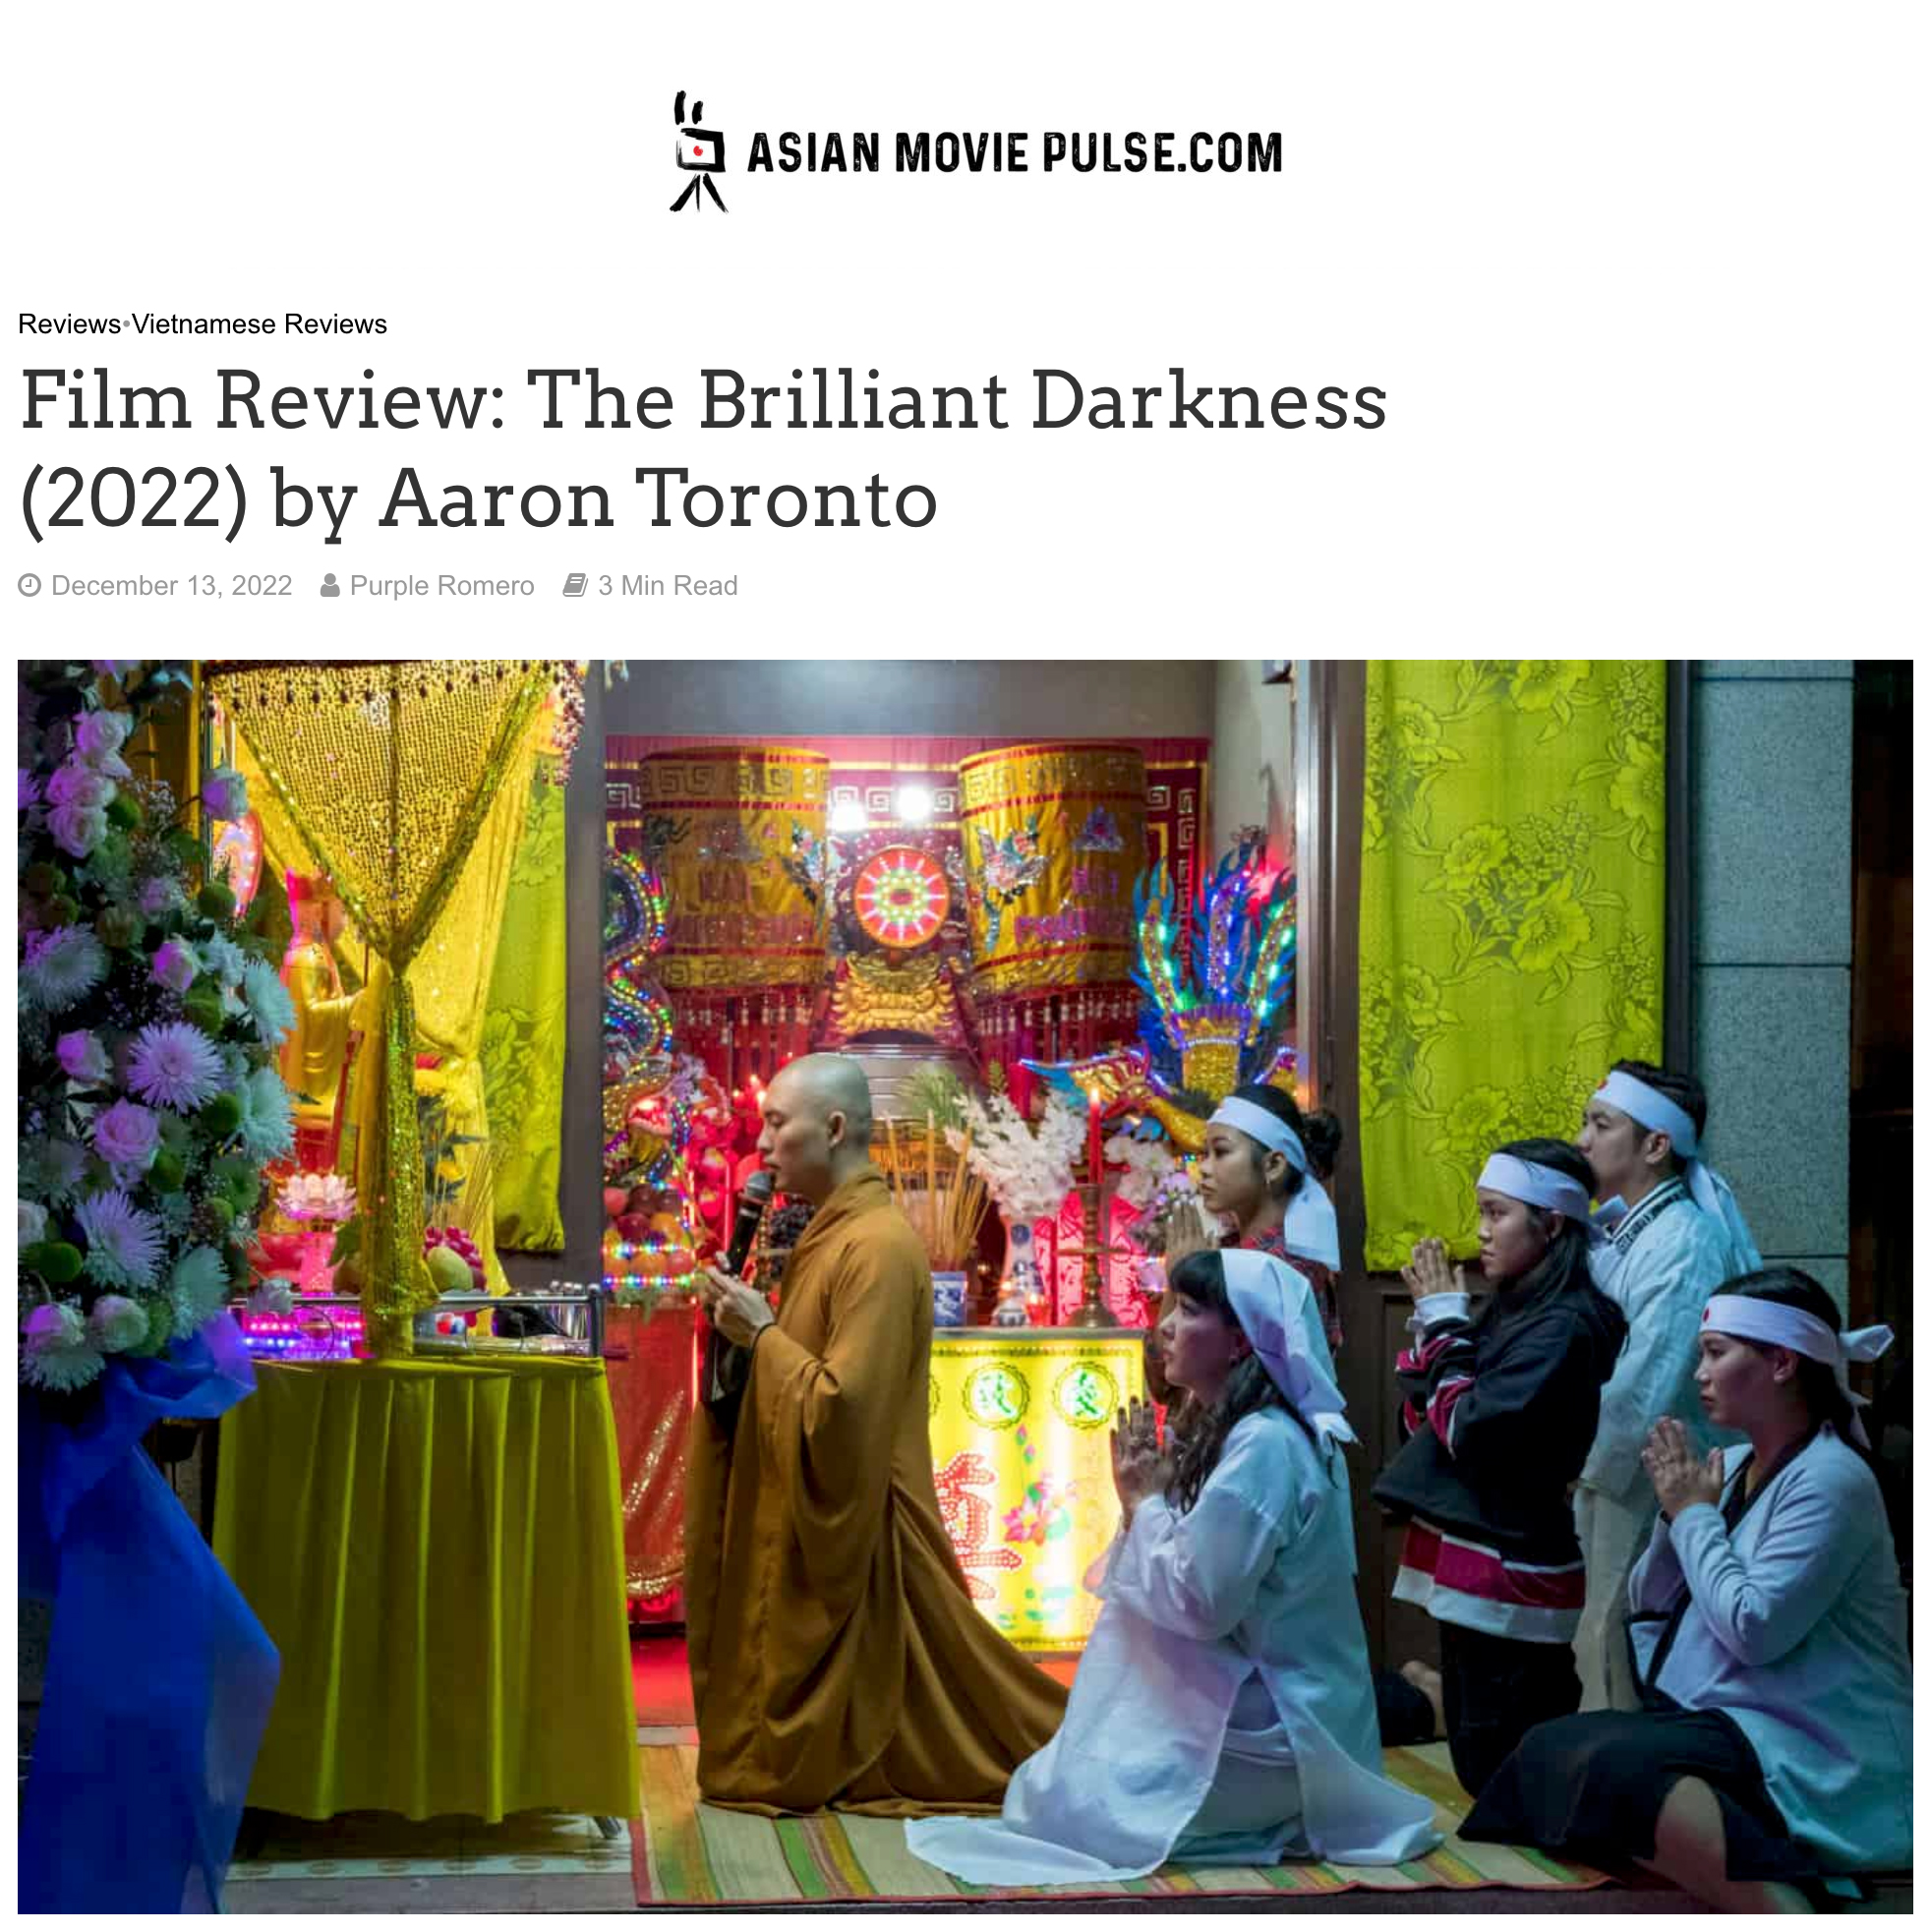 Film Review: The Brilliant Darkness (2022) by Aaron Toronto